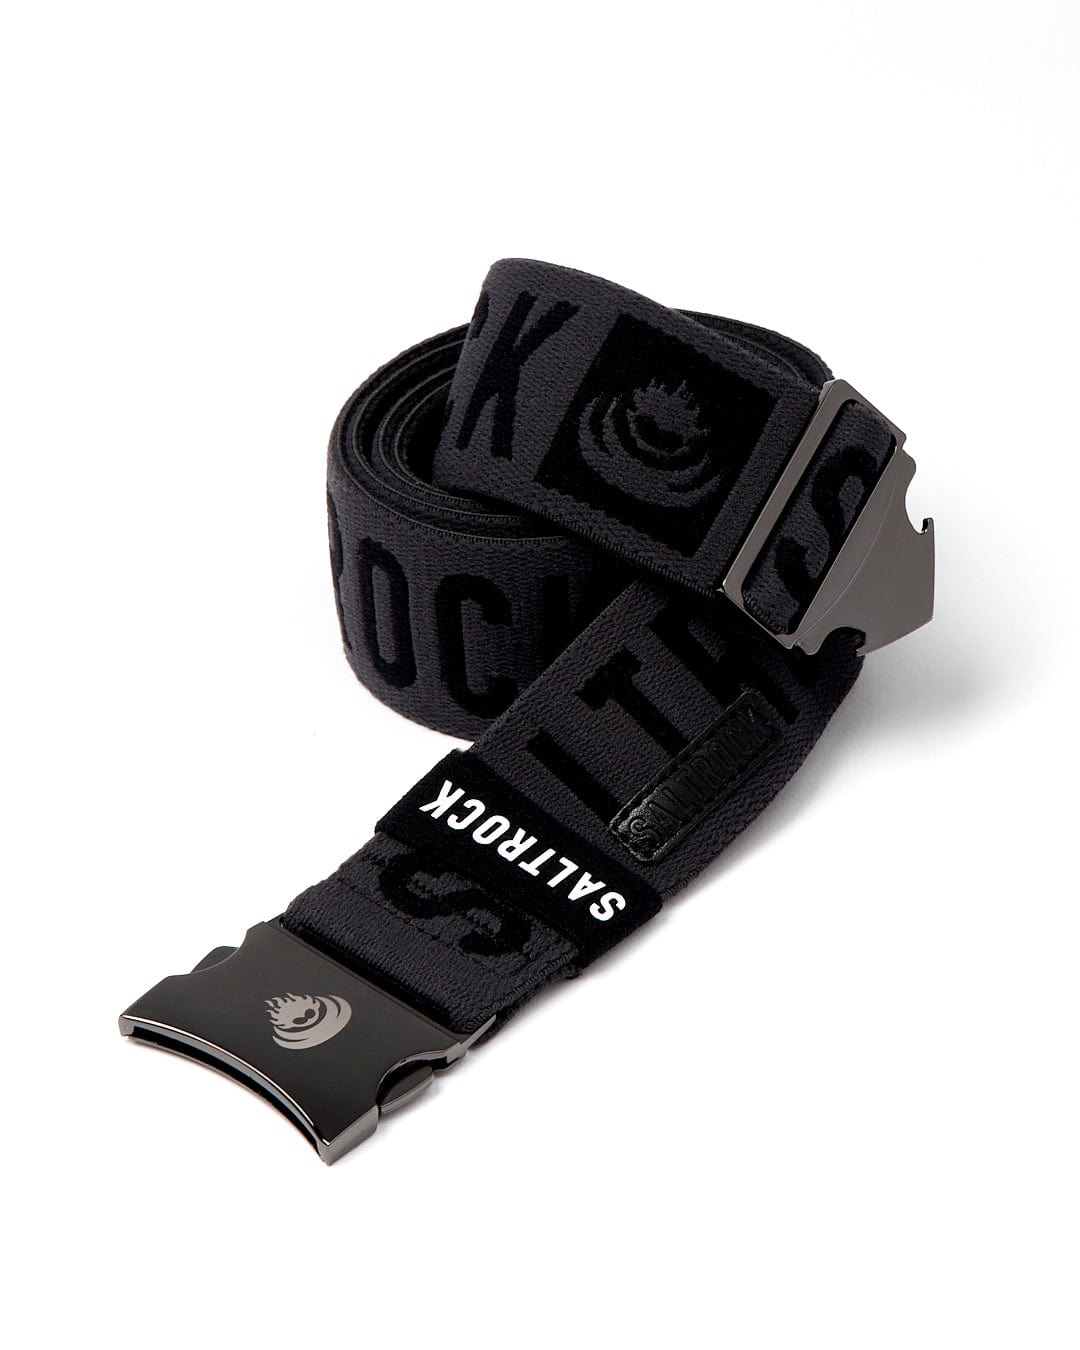 A black Identity - Stretch Belt with a Saltrock branding logo on it, featuring a metal clip buckle.